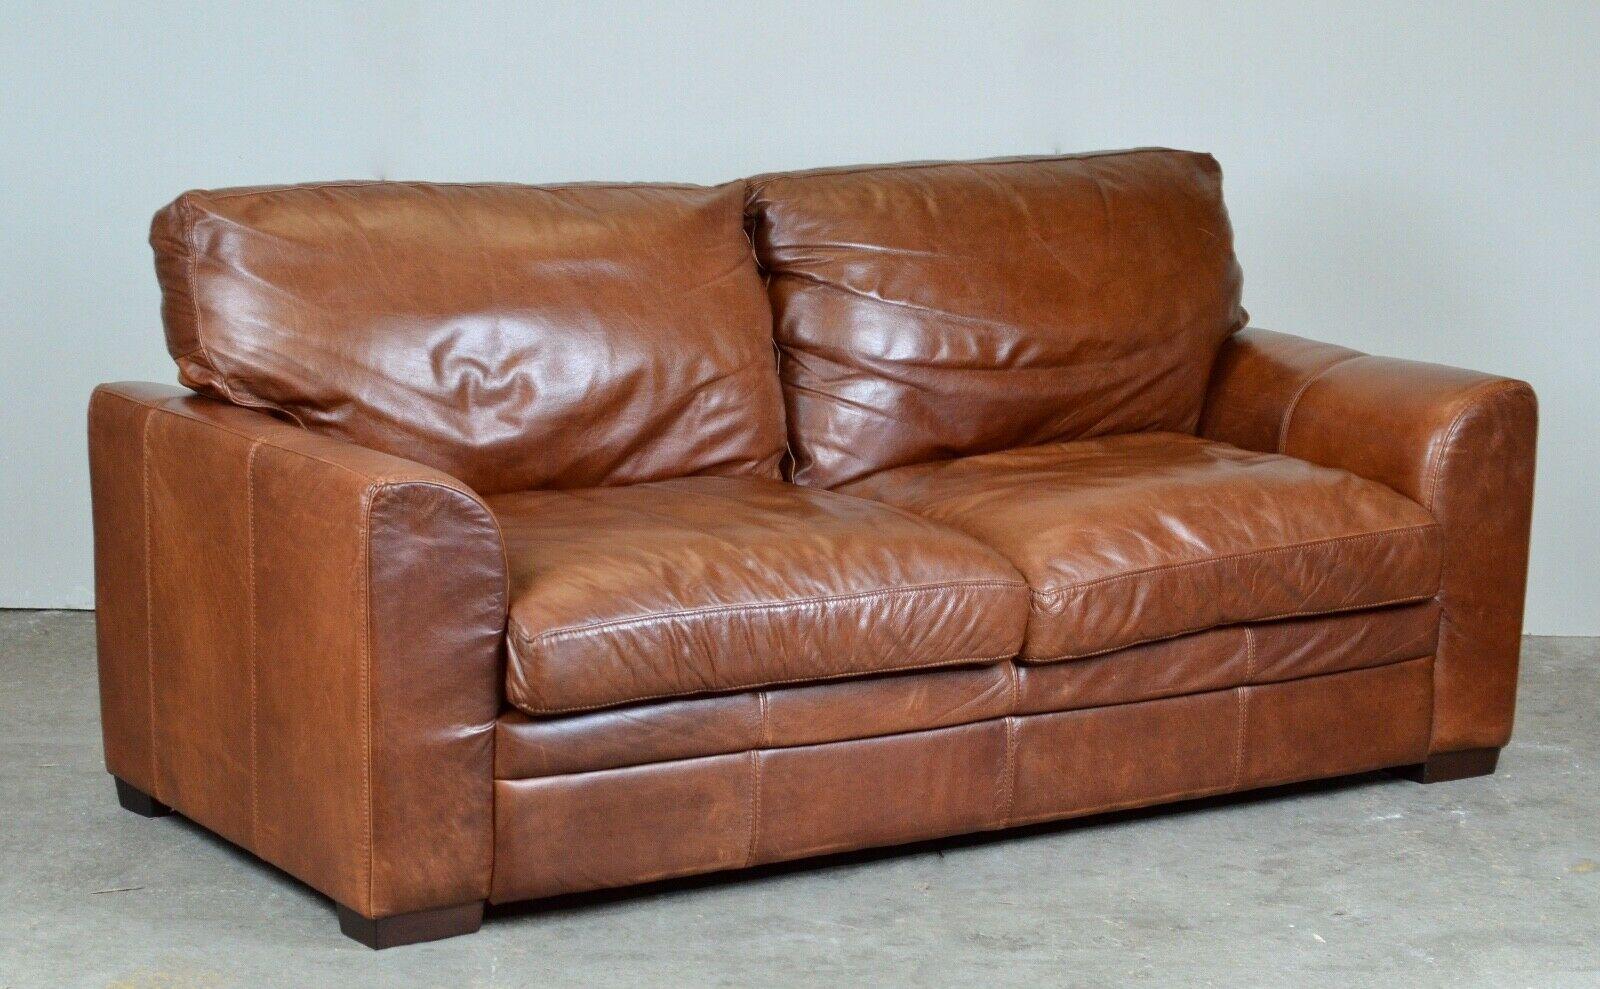 We are delighted to offer for sale this luxury Viva Italian designer tan leather 3 seater sofa.
A stunning designer collection with boastful proportions. This sofa range features large arms with deep seats and extra sumptuous sink into luxurious